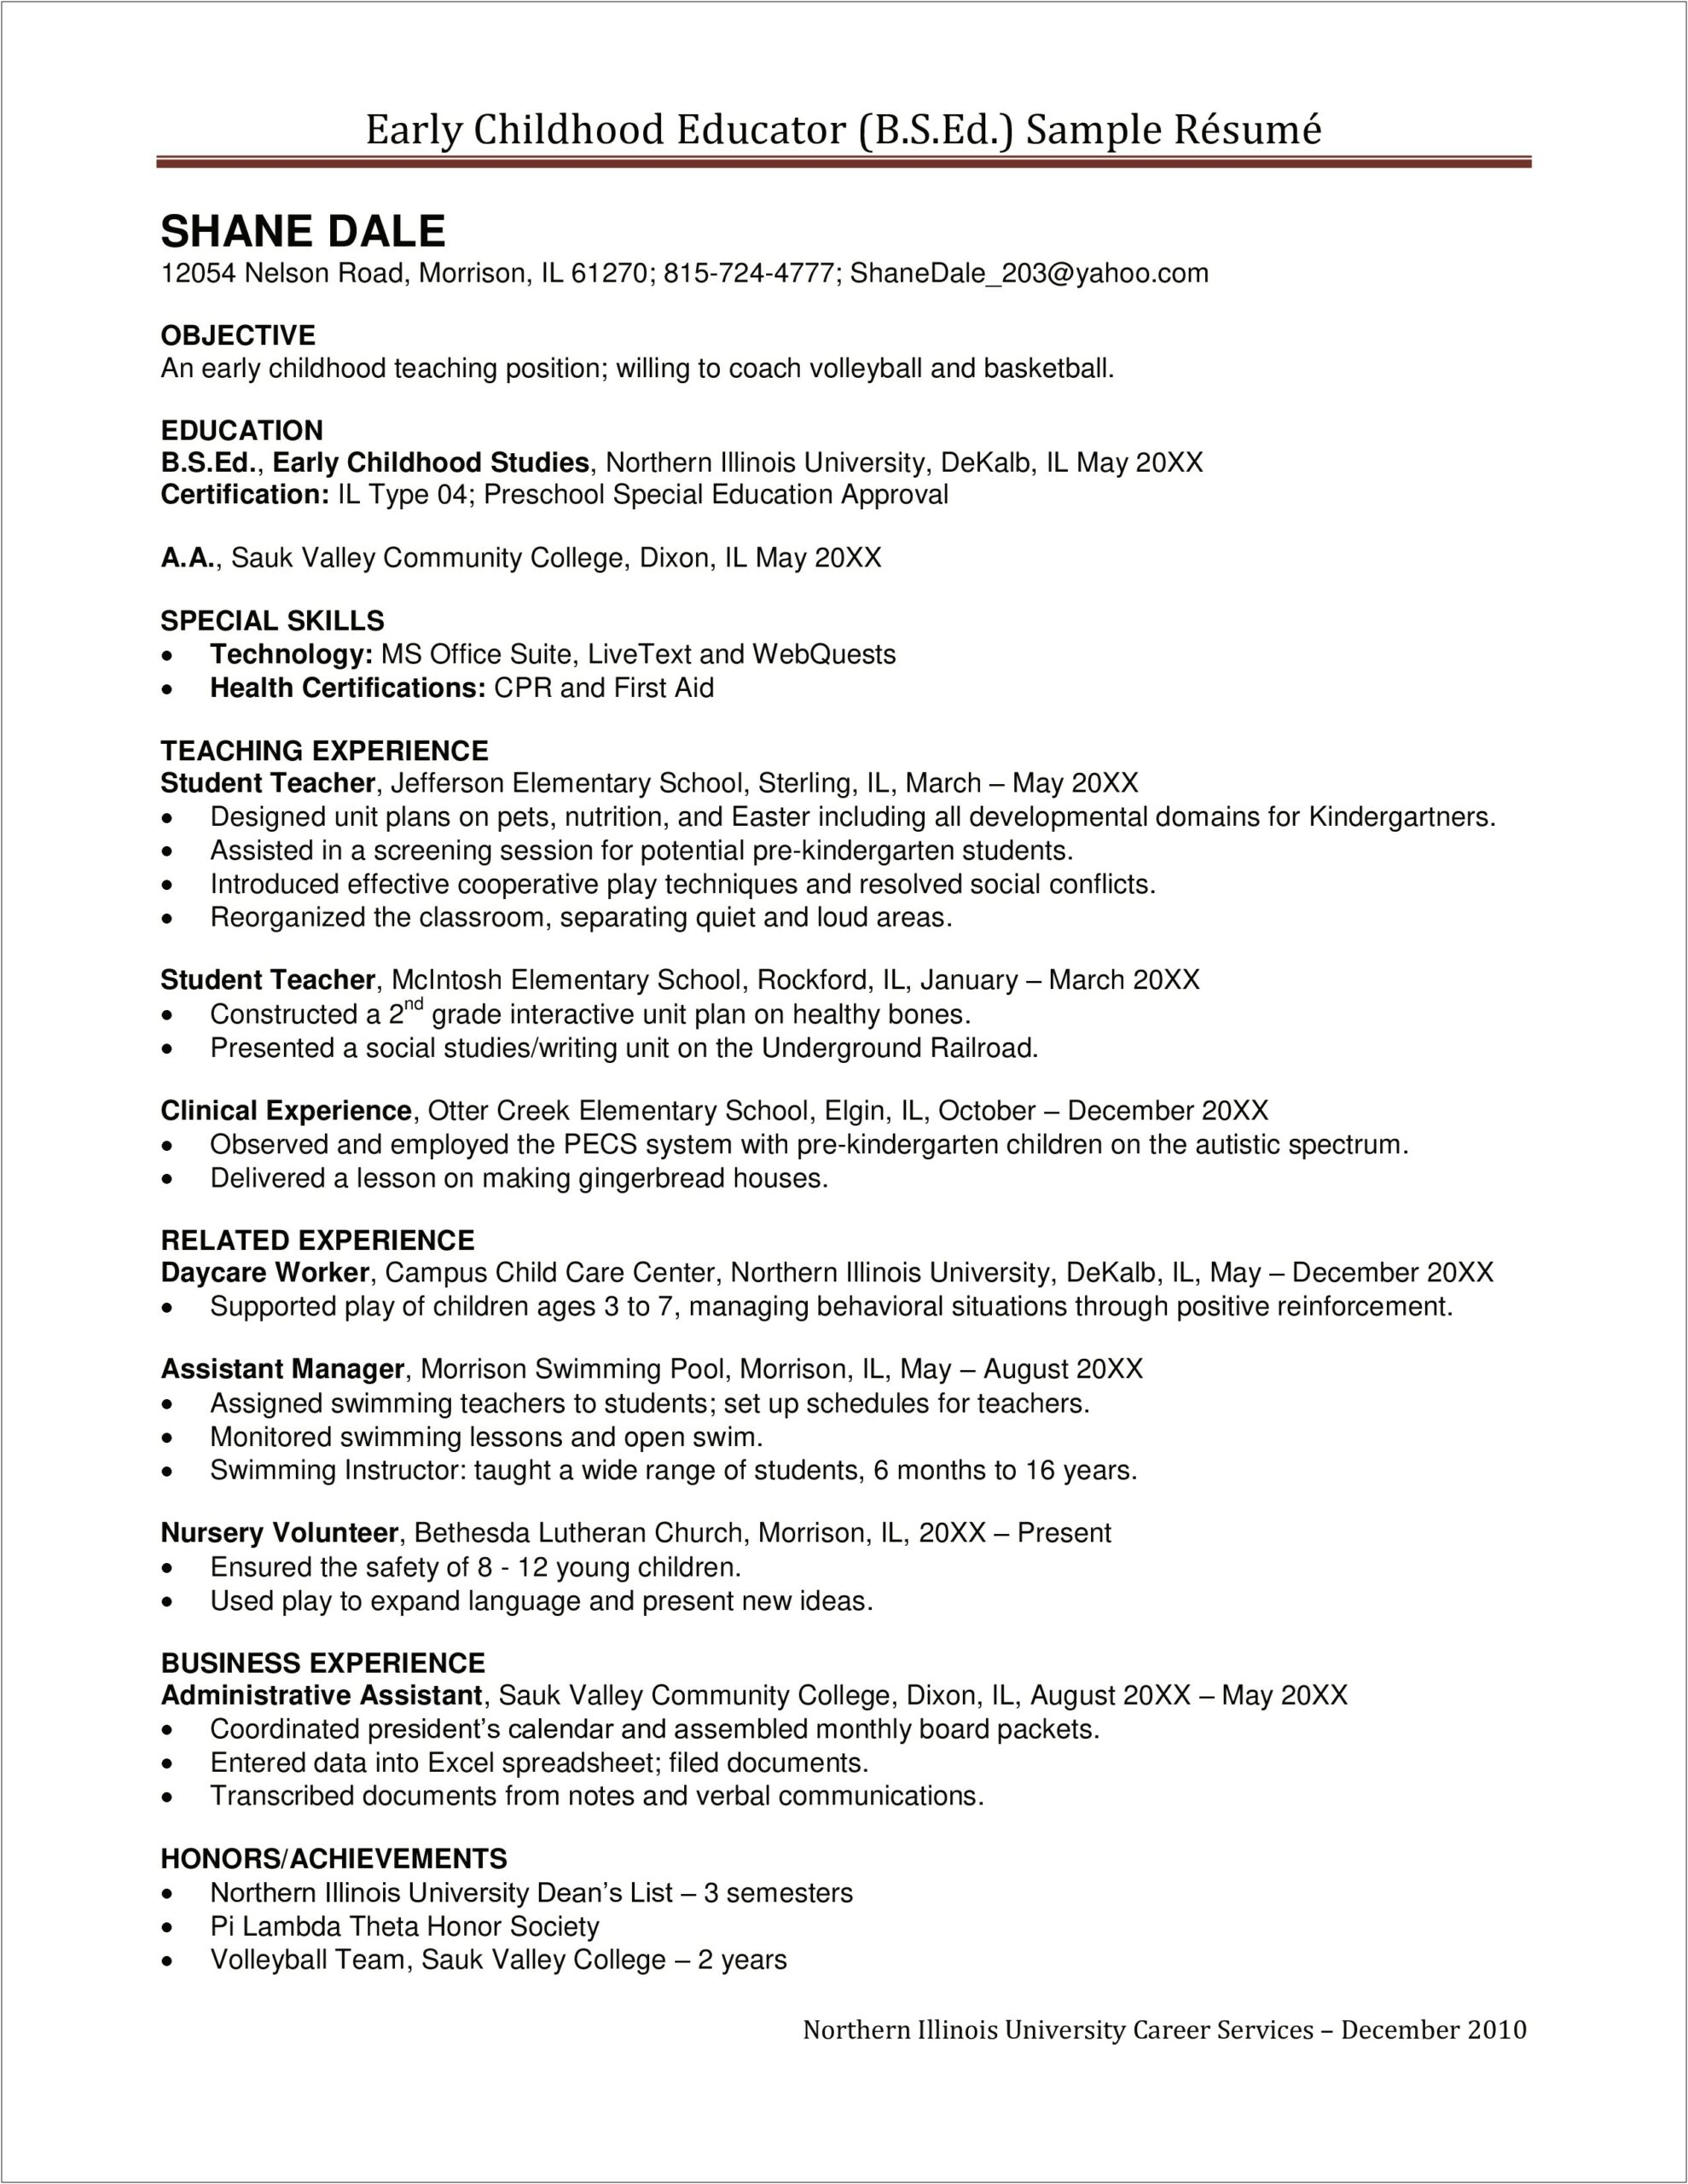 Resume Objective Early Childhood Education